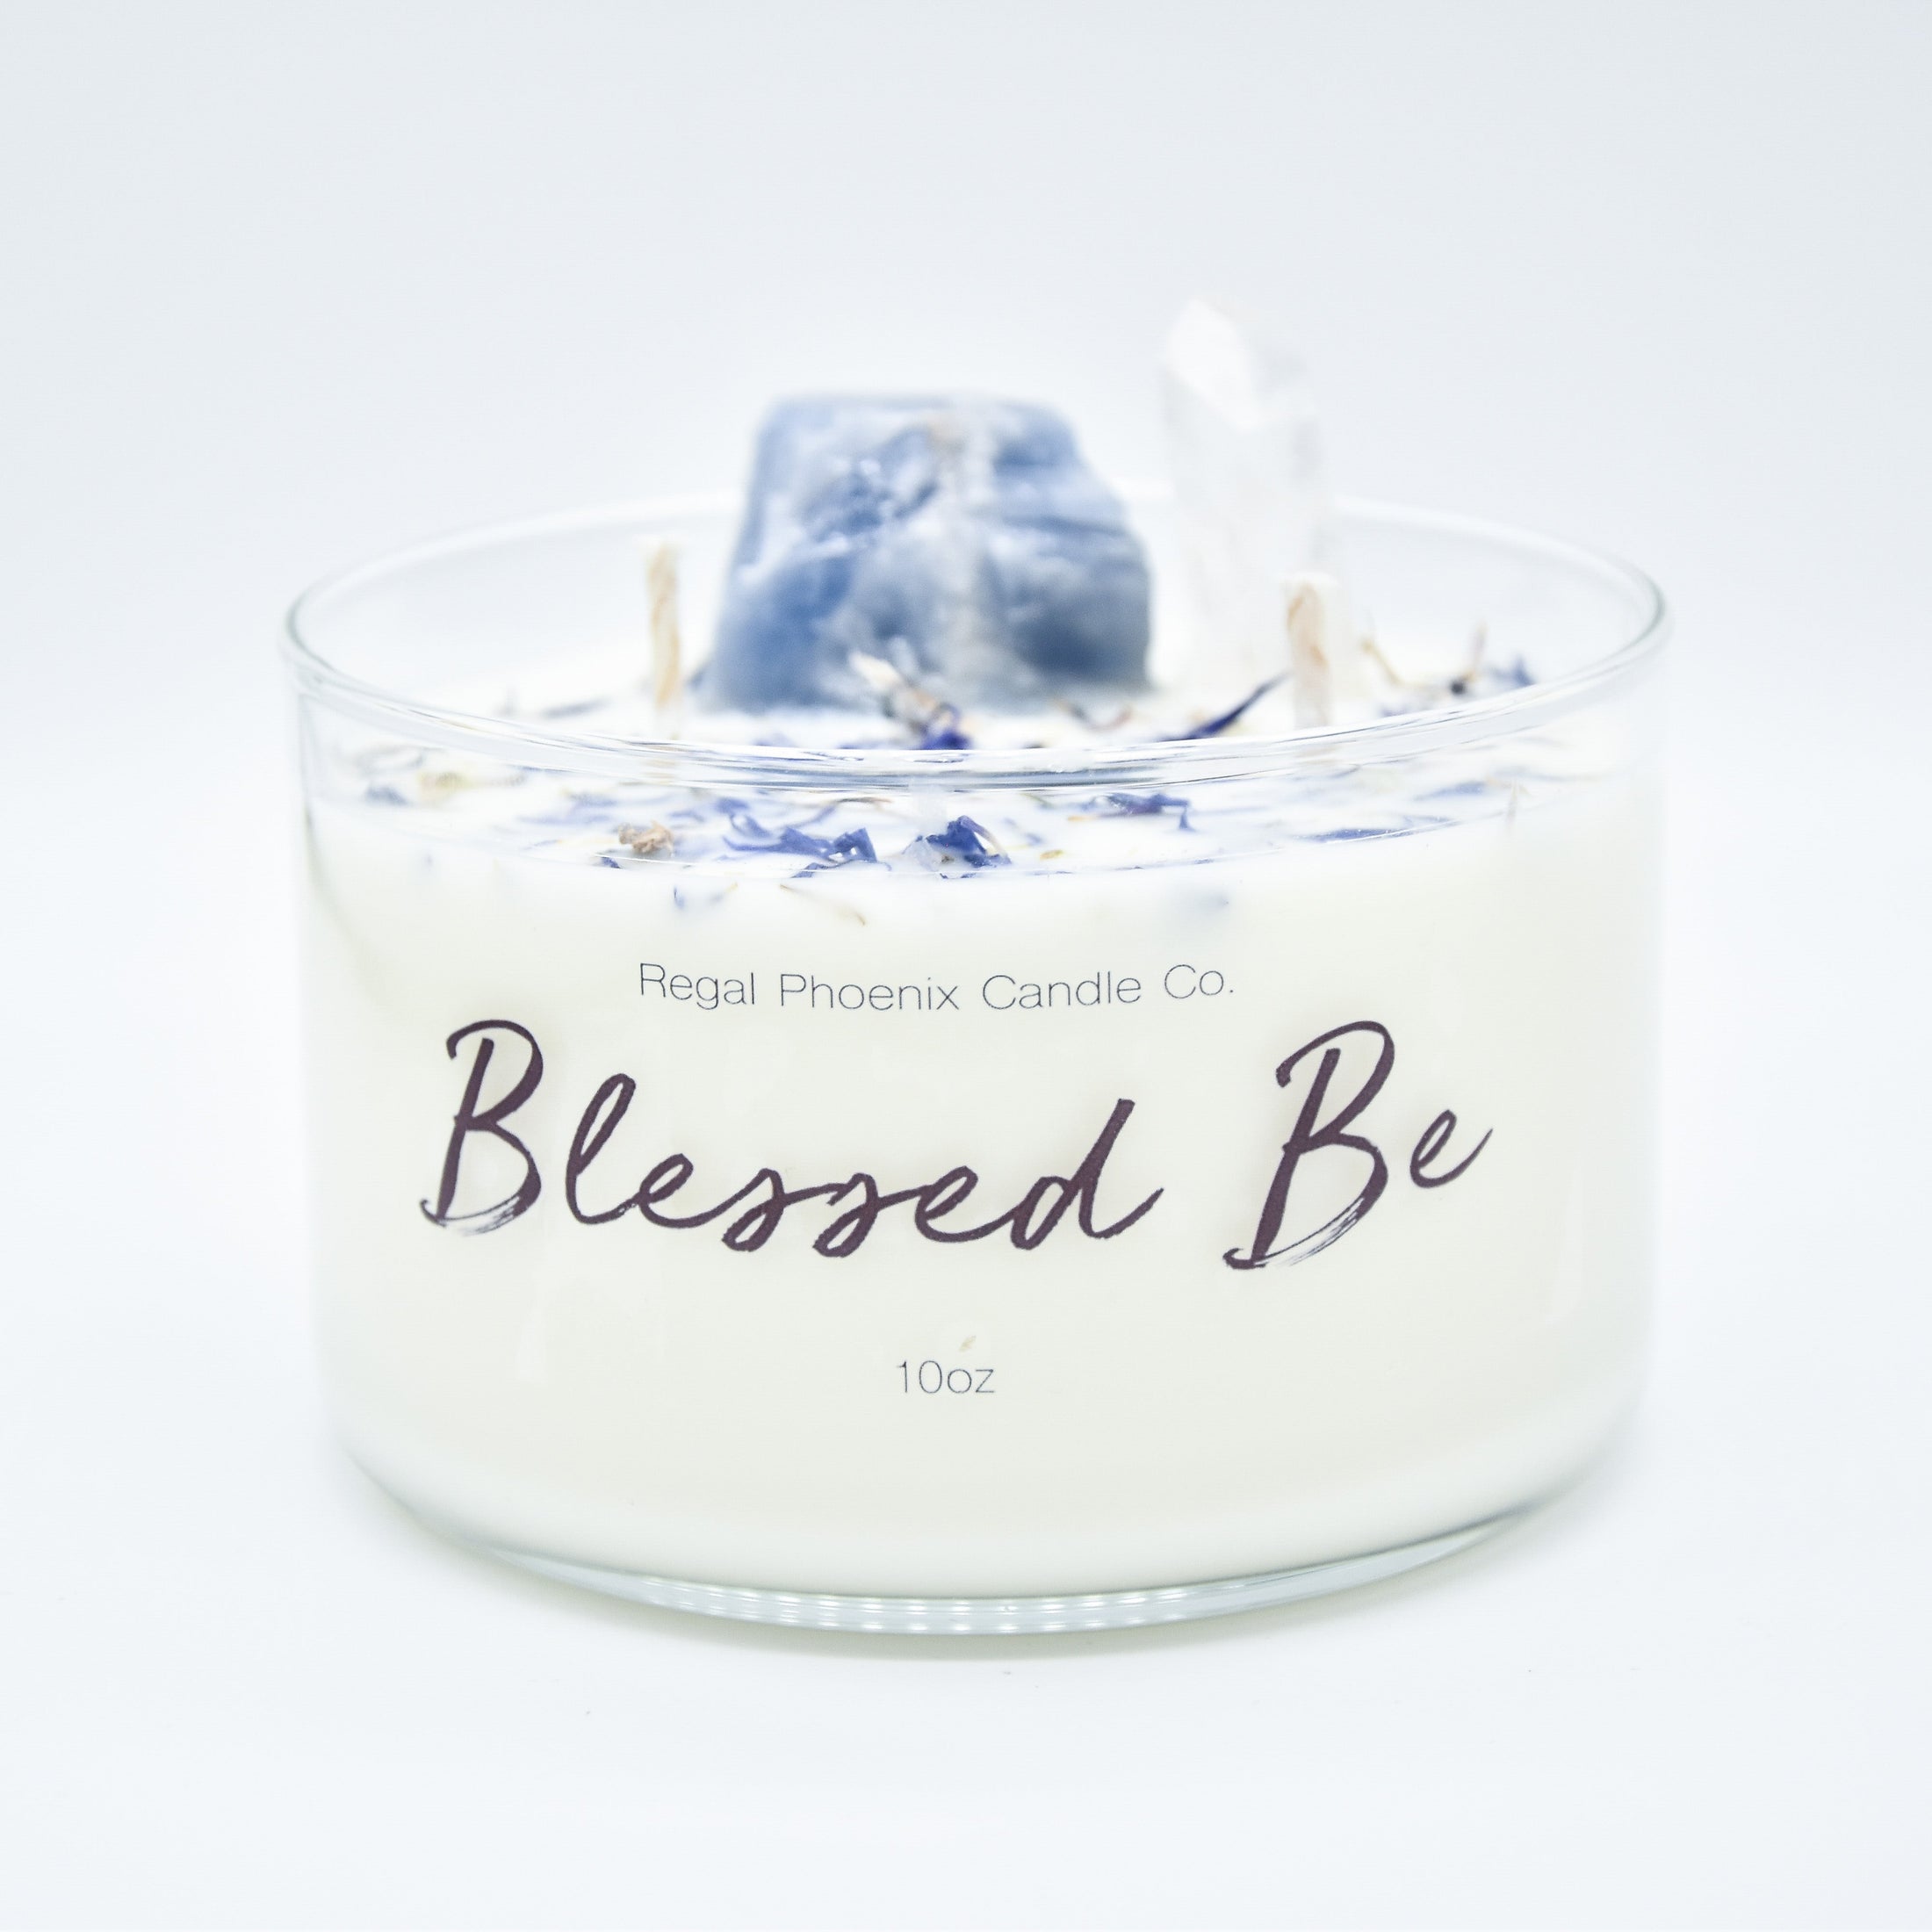 "Blessed Be" Crystal Infused Soy Candle